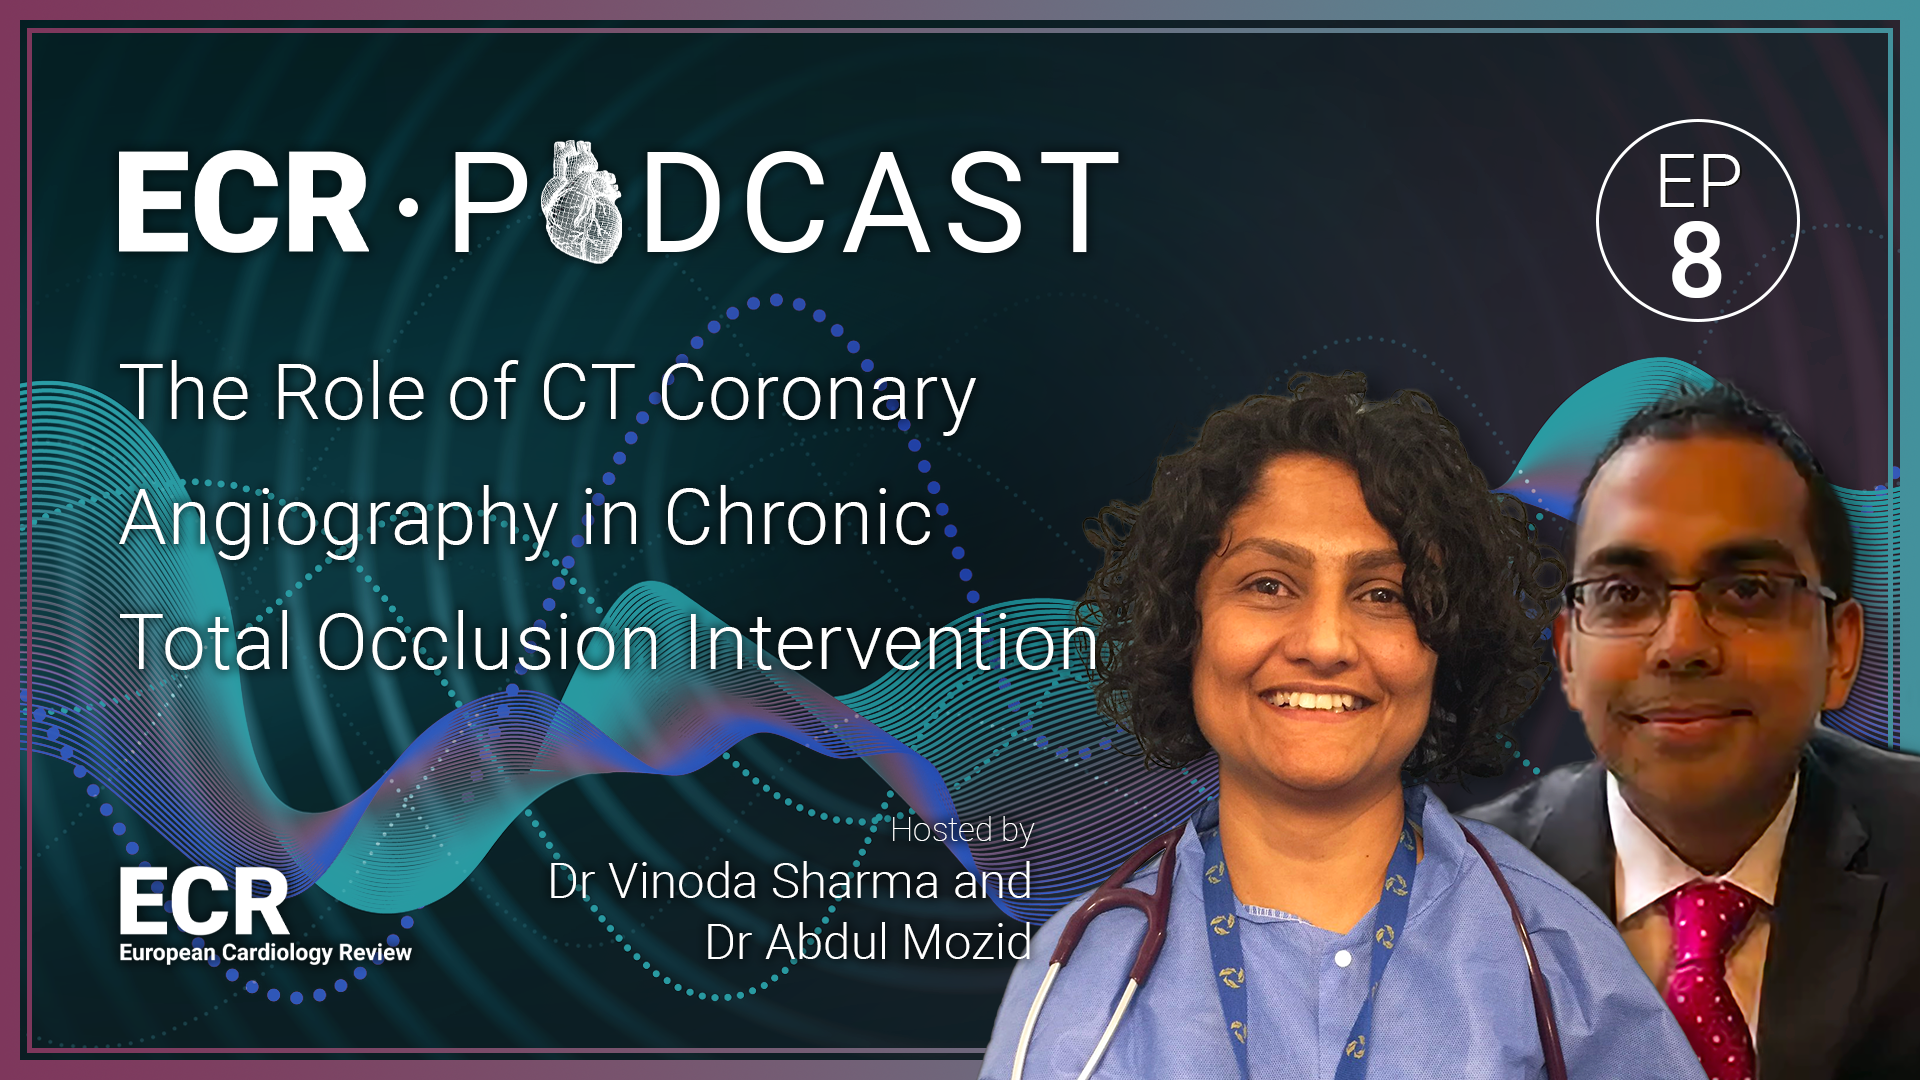 EP 8: The Role of CT Coronary Angiography in Chronic Total Occlusion Intervention